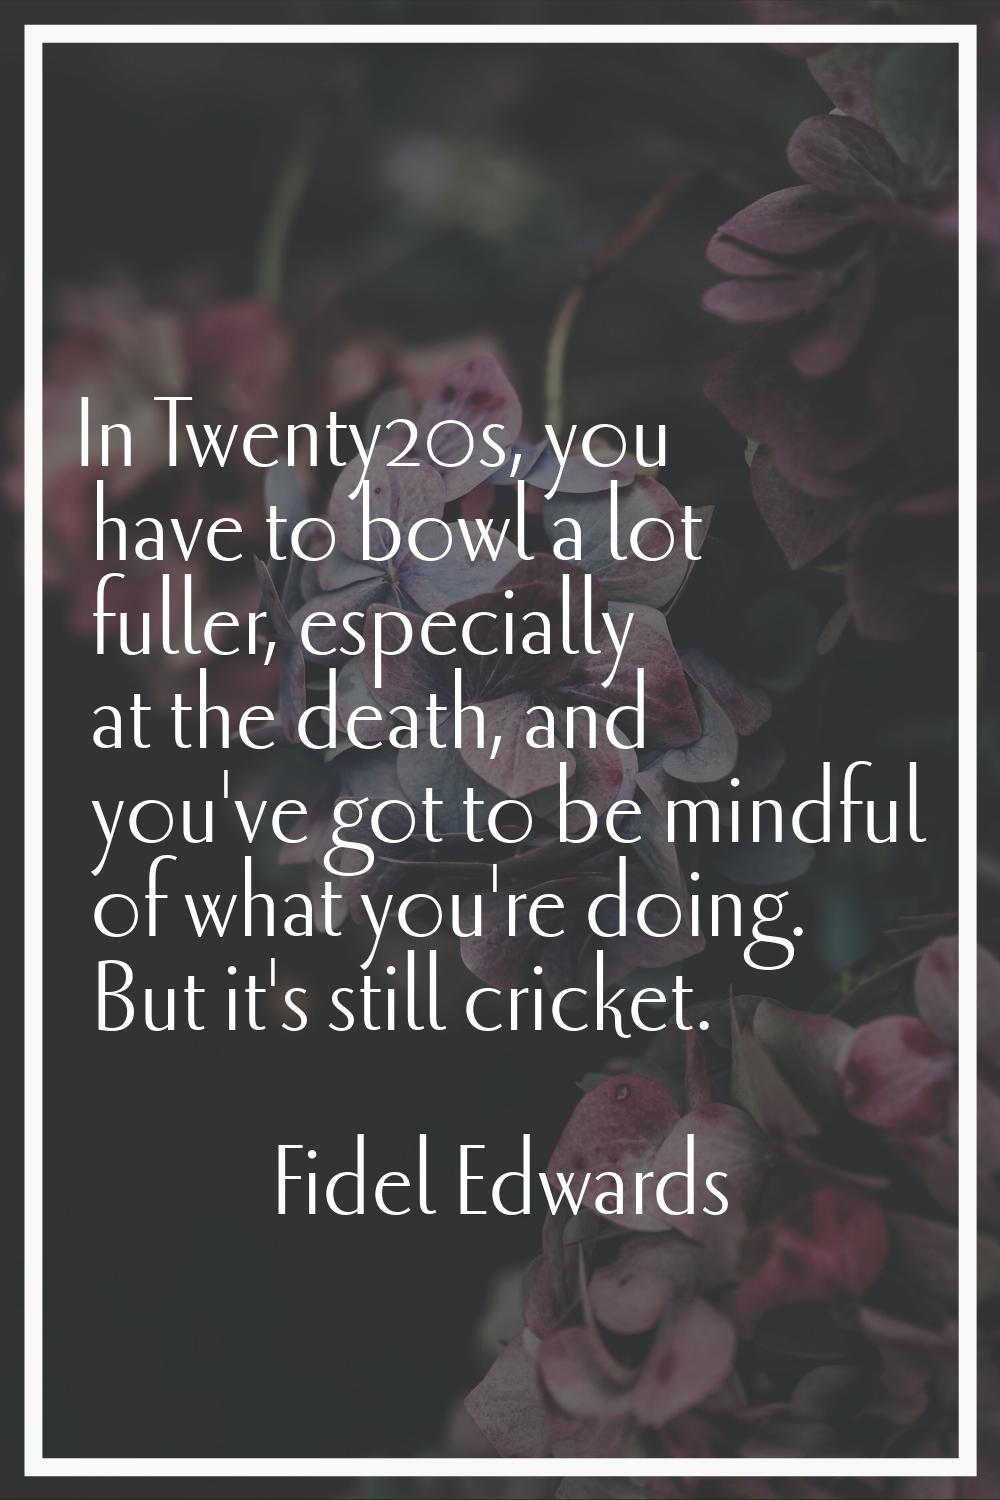 In Twenty20s, you have to bowl a lot fuller, especially at the death, and you've got to be mindful 